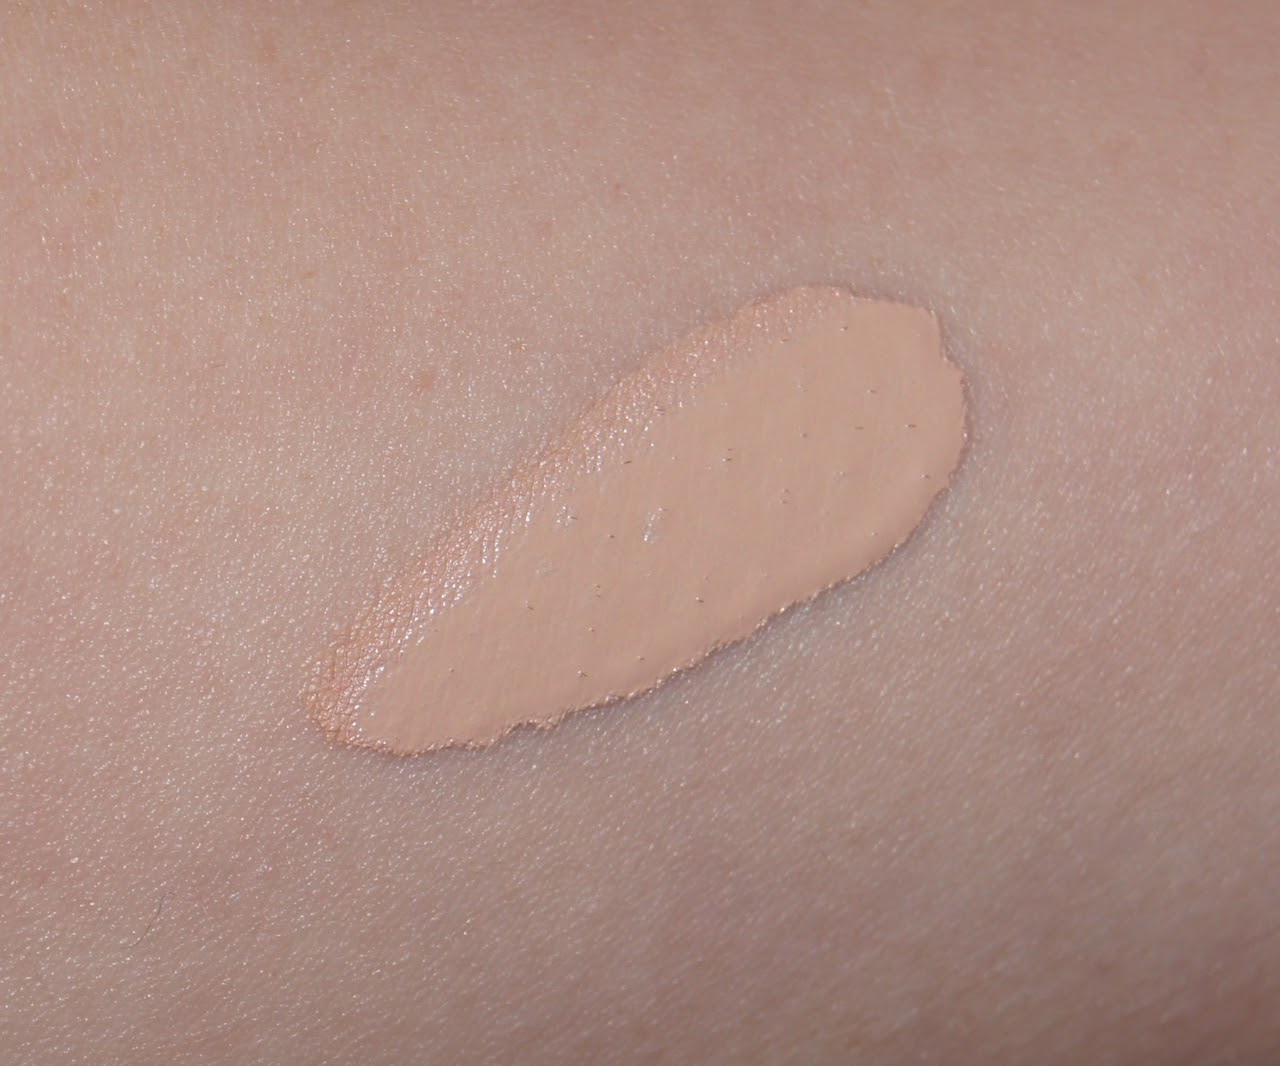 clarins instant concealer shade 01 swatch blended review